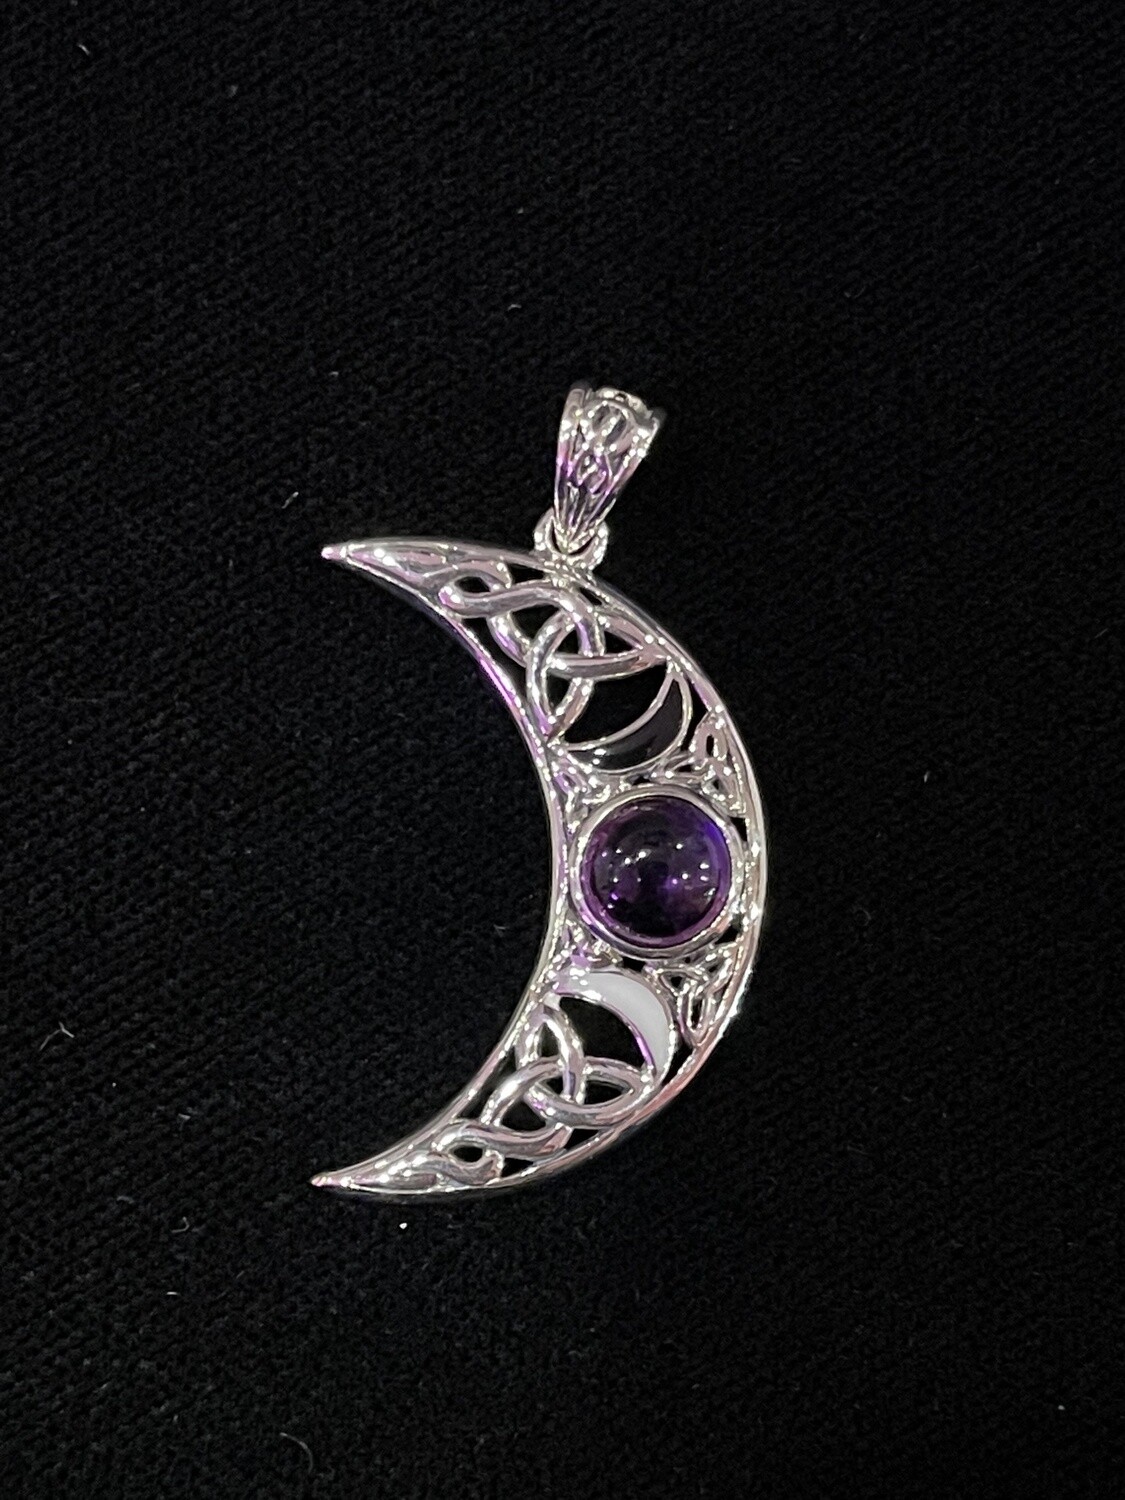 Blue Moon Large Silver Pendant with Gem and Enamel Genuine Amethyst